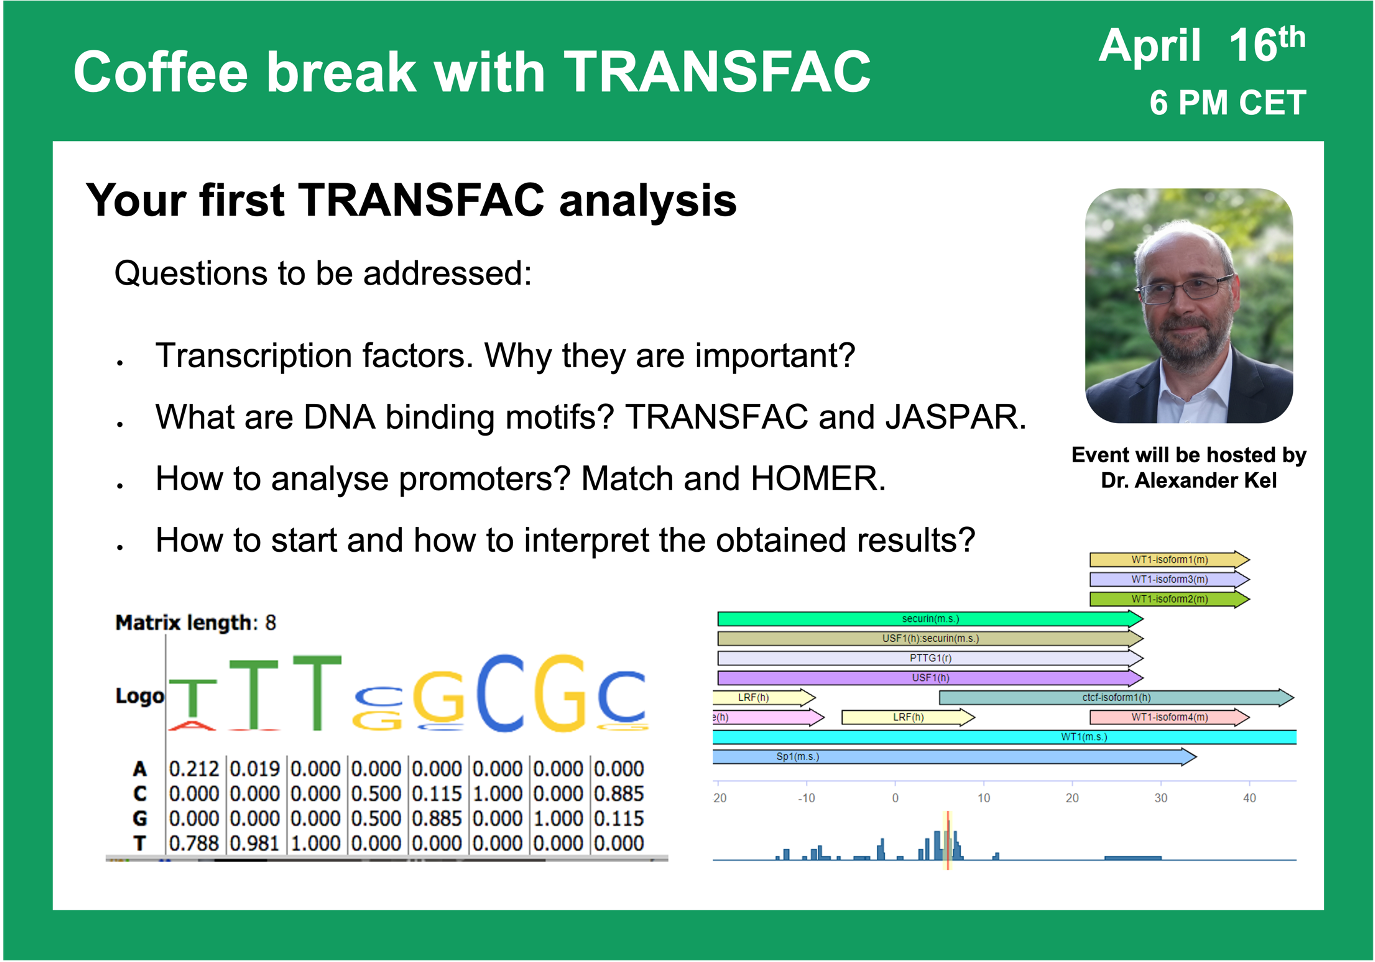 Your first TRANSFAC analysis - Coffee break with TRANSFAC April 16th 6 PM CET